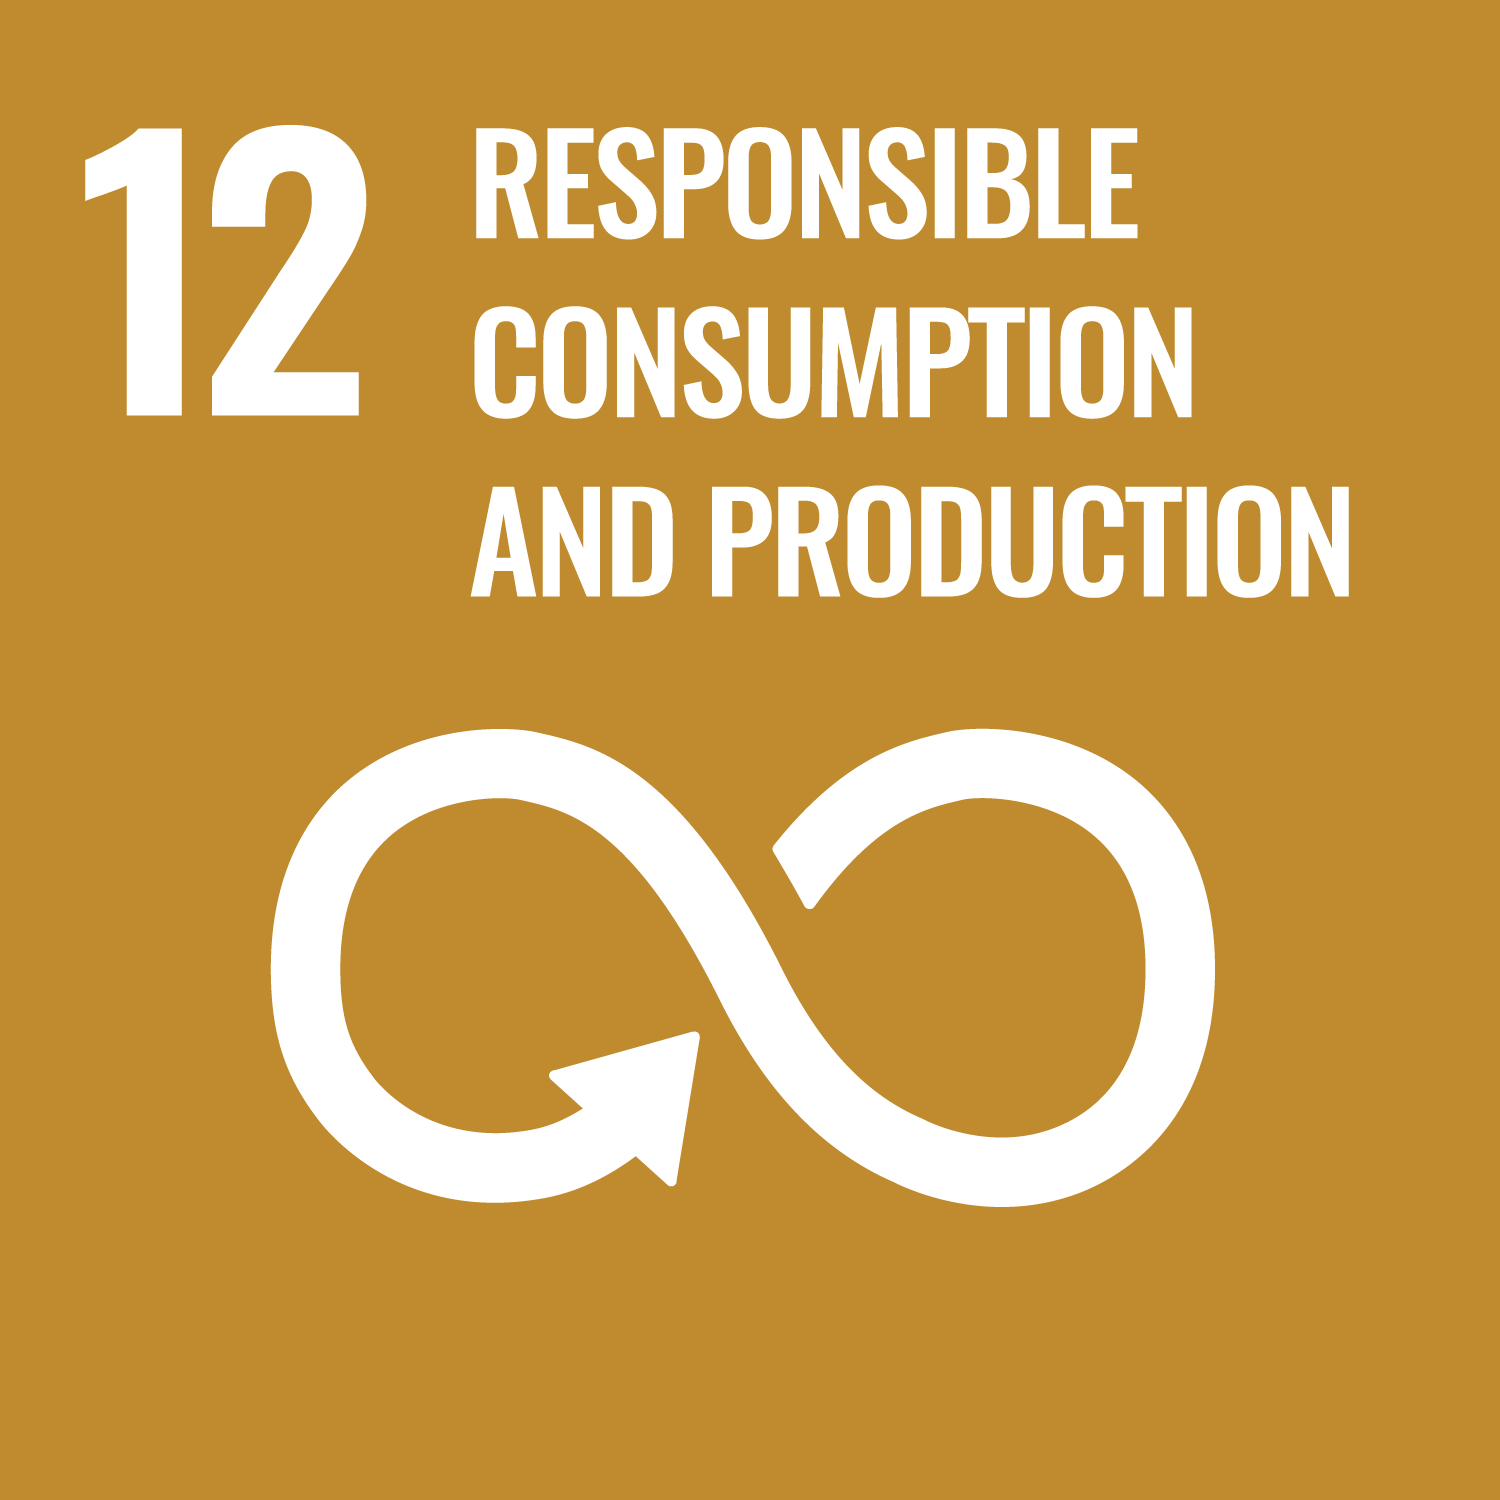 UN Compact Goal 12 Icon "Responsible Consumption and Production"